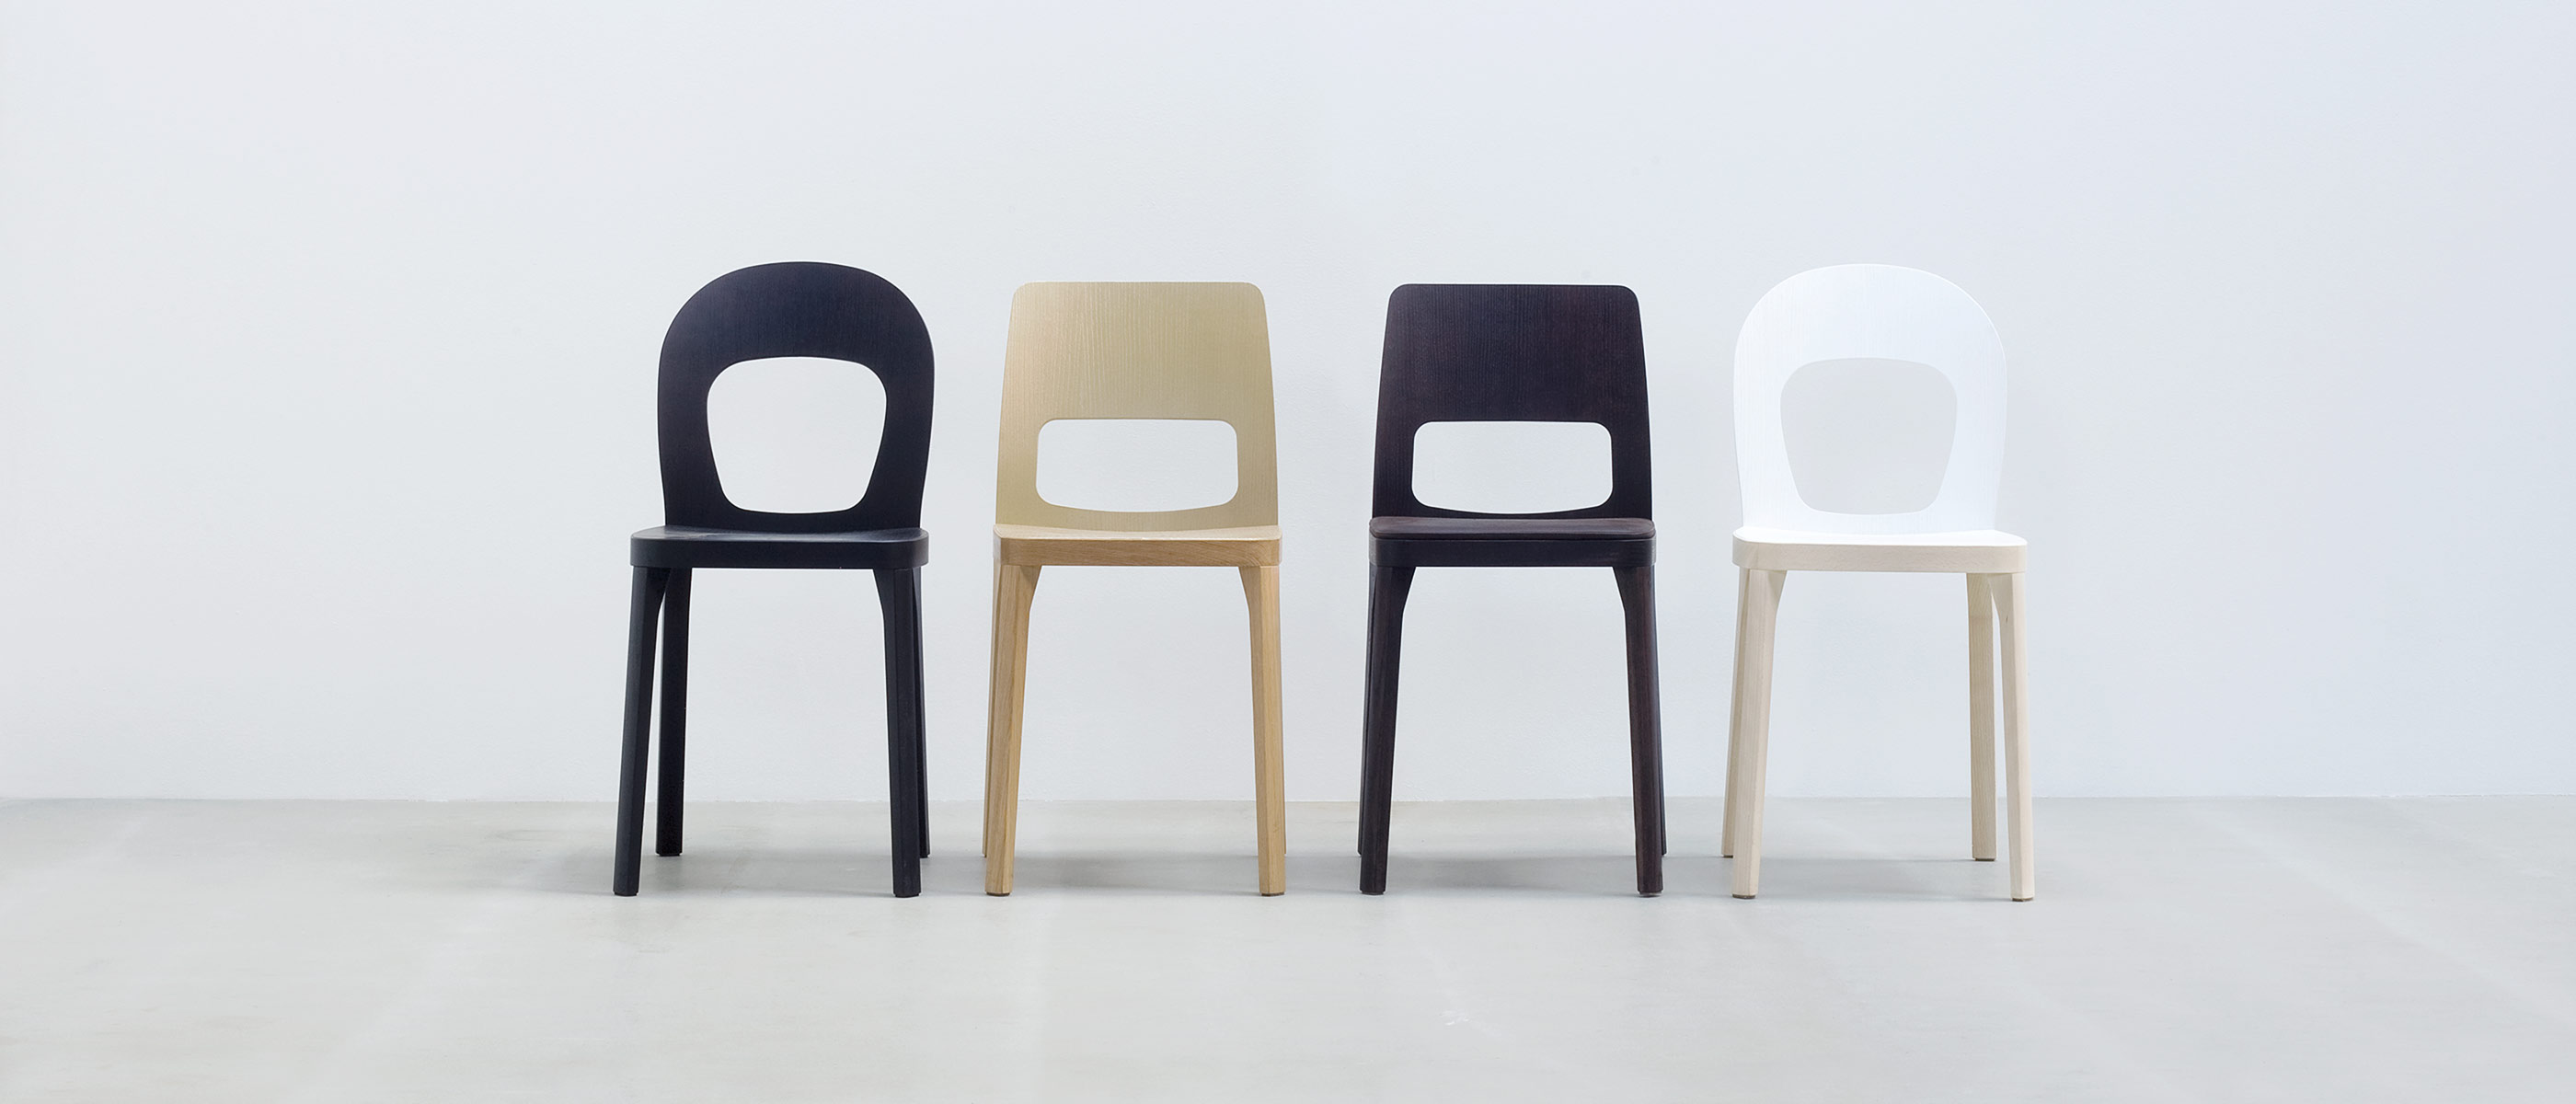 The ST6N Square and Round-Back Chairs